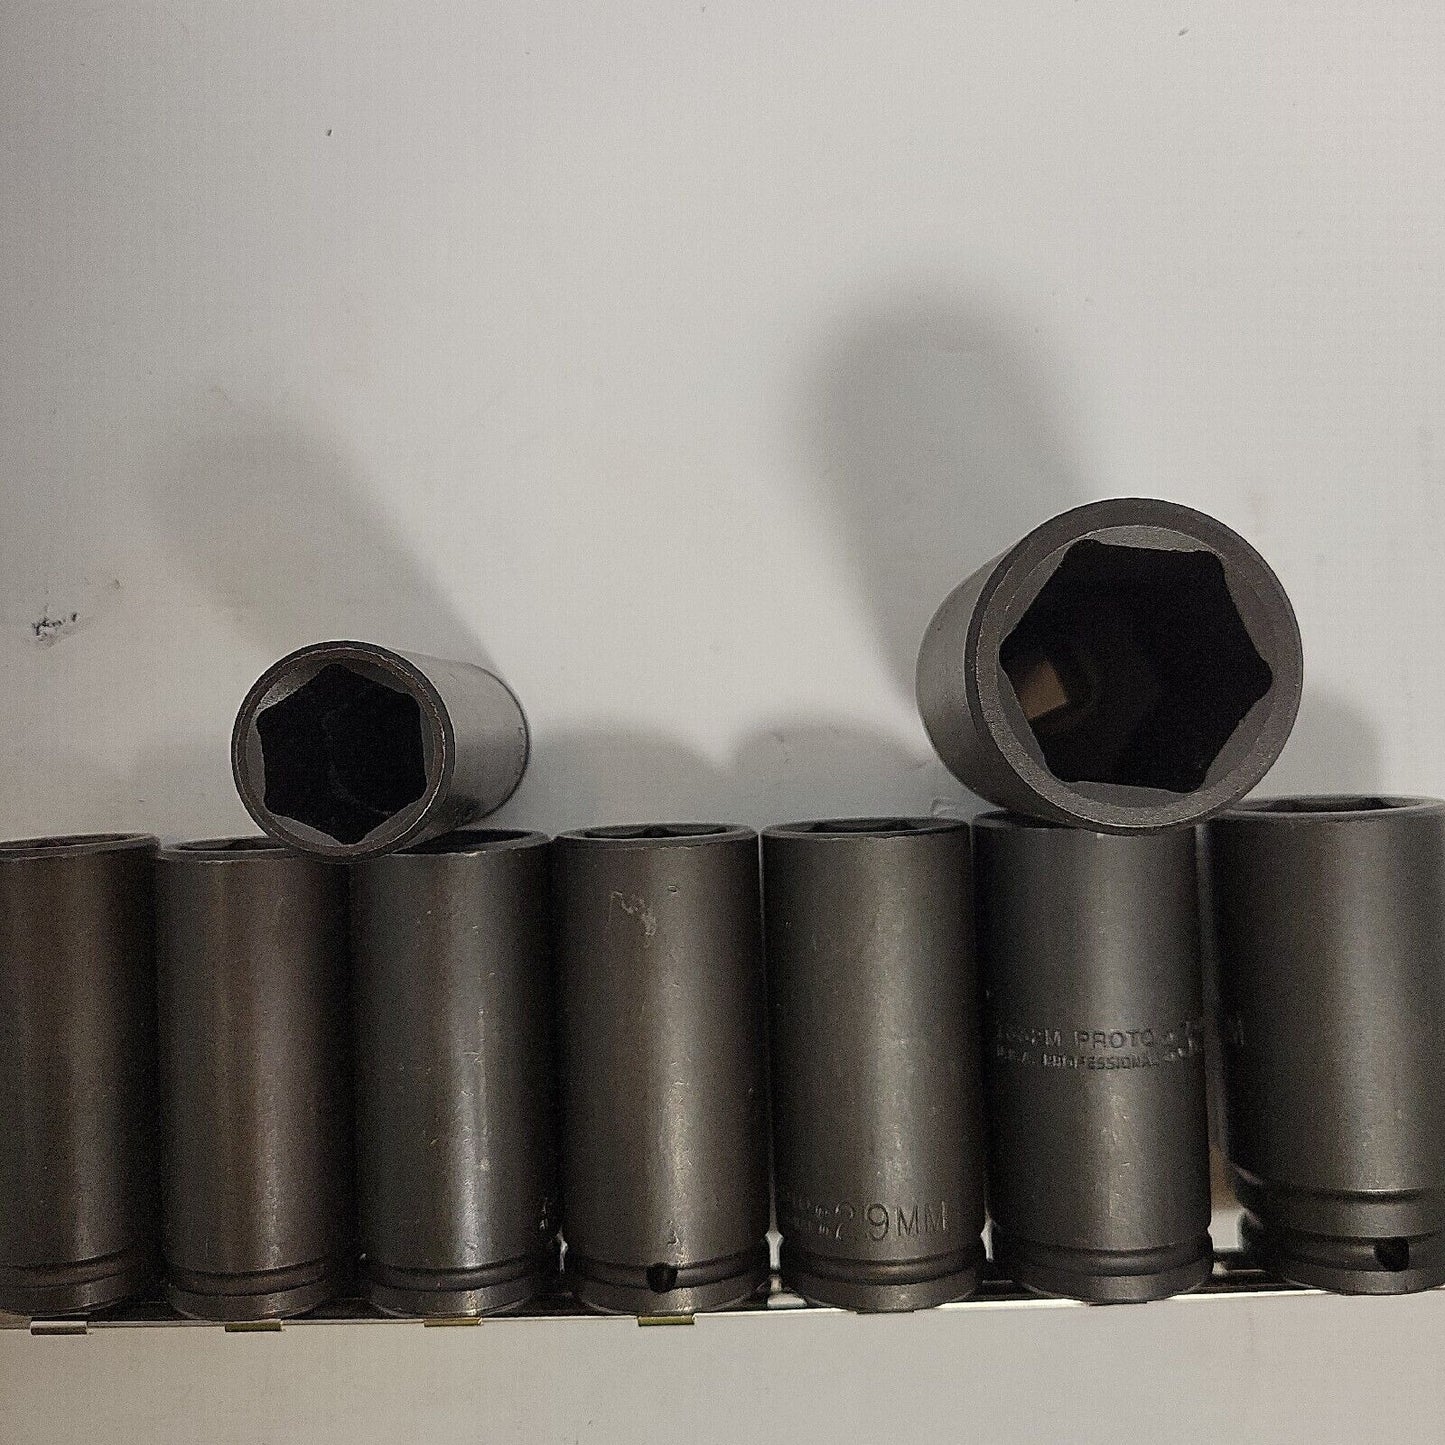 Proto 1/2" drive Deep Impact socket Metric,  24mm to 36 mm NOS, 9 pieces.